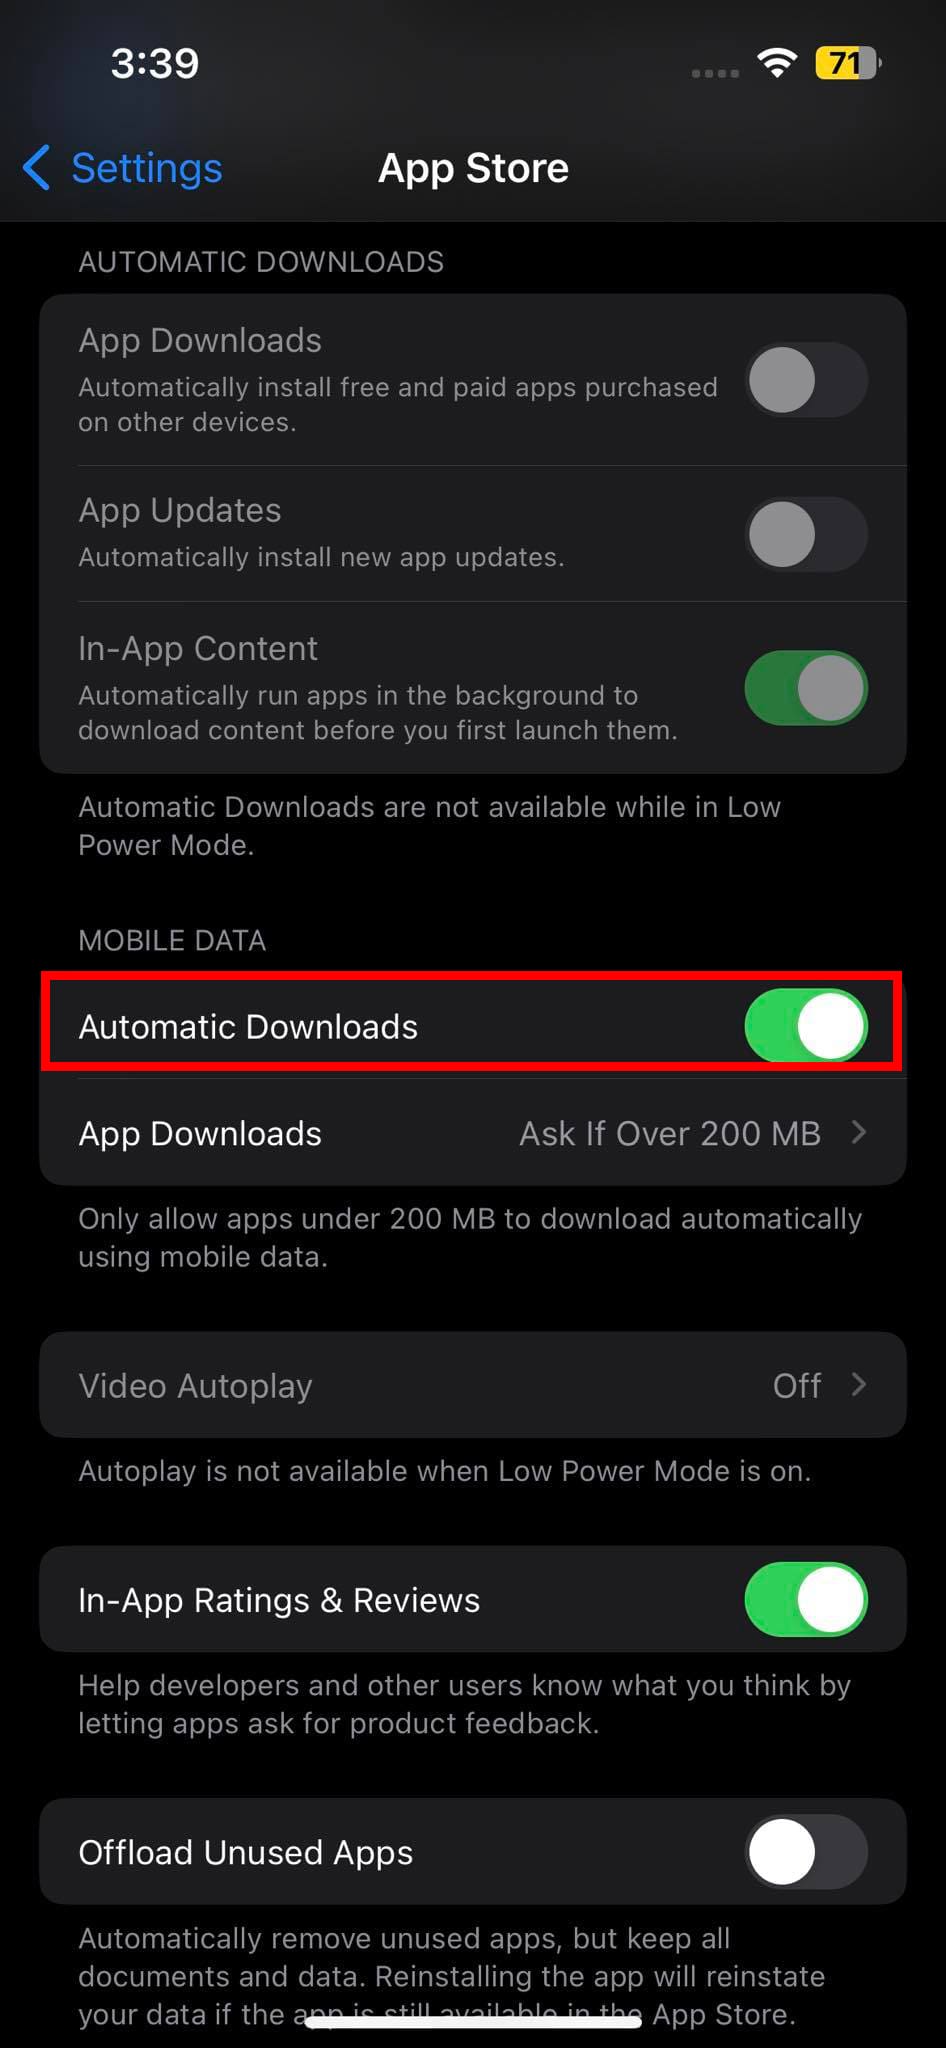 App Store Automatic Downloads